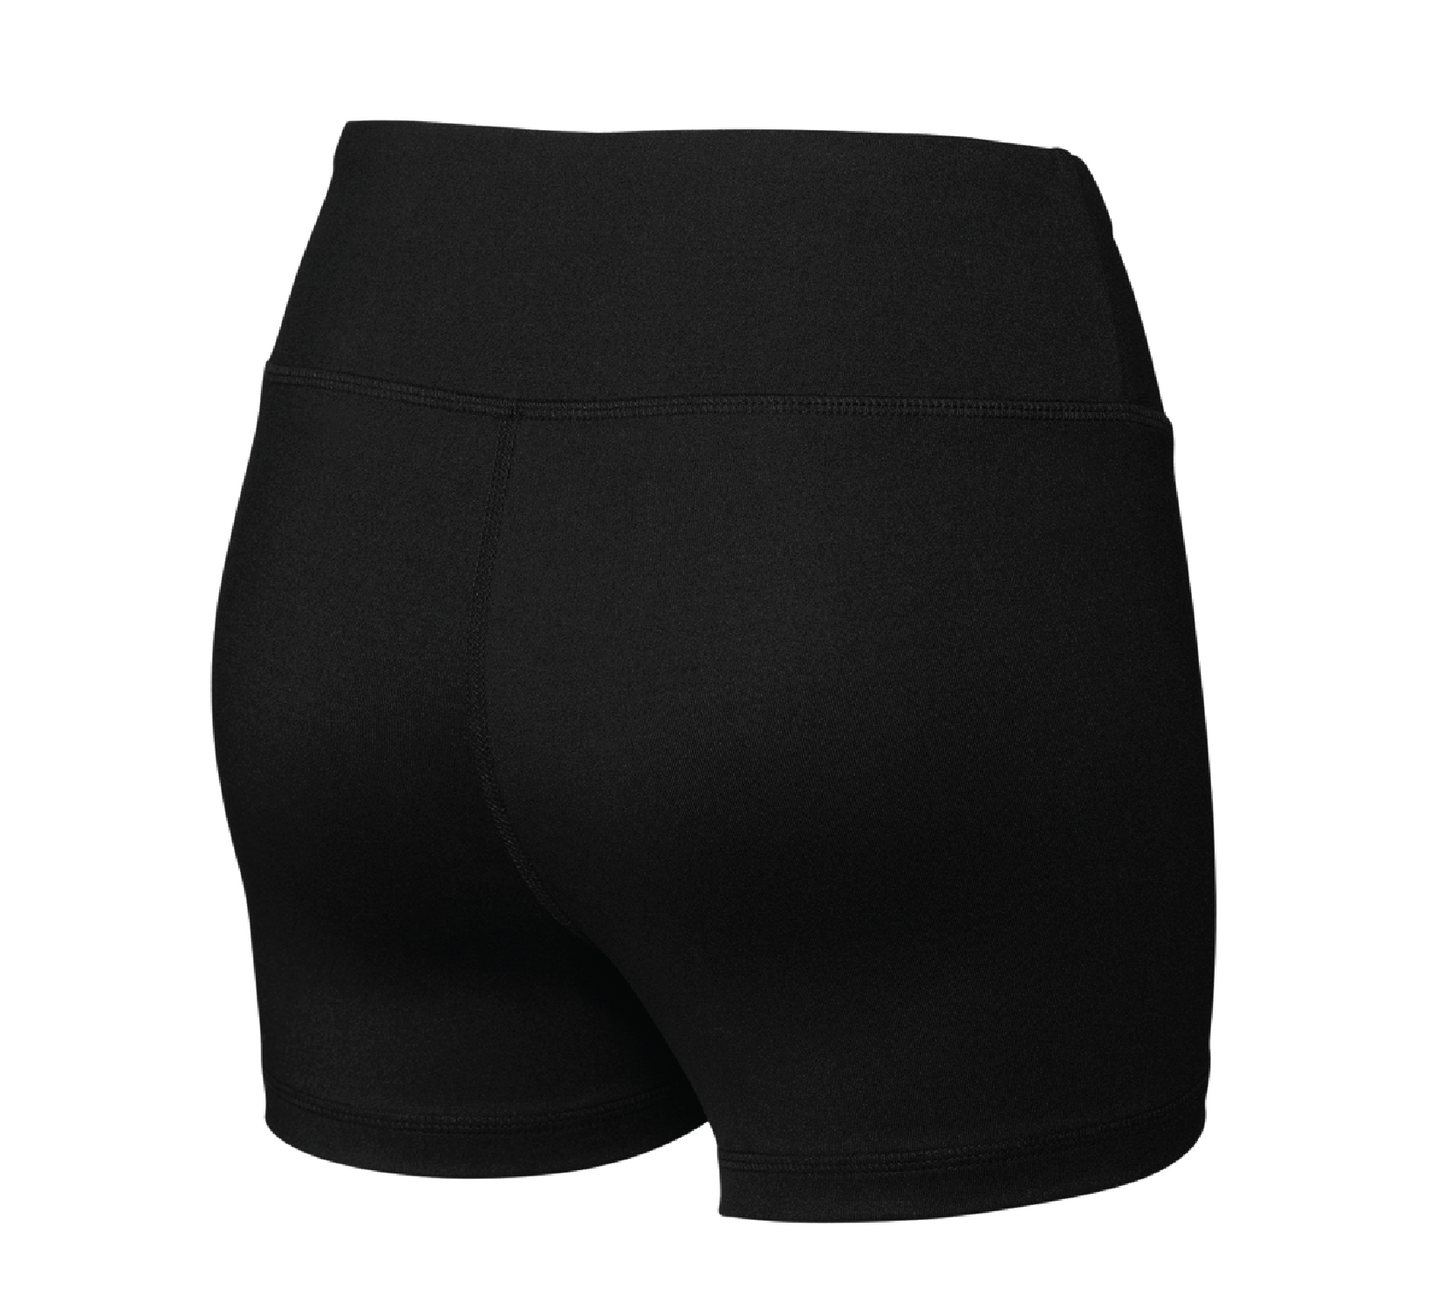 Hellbent Barbell Womens's Spandex Shorts